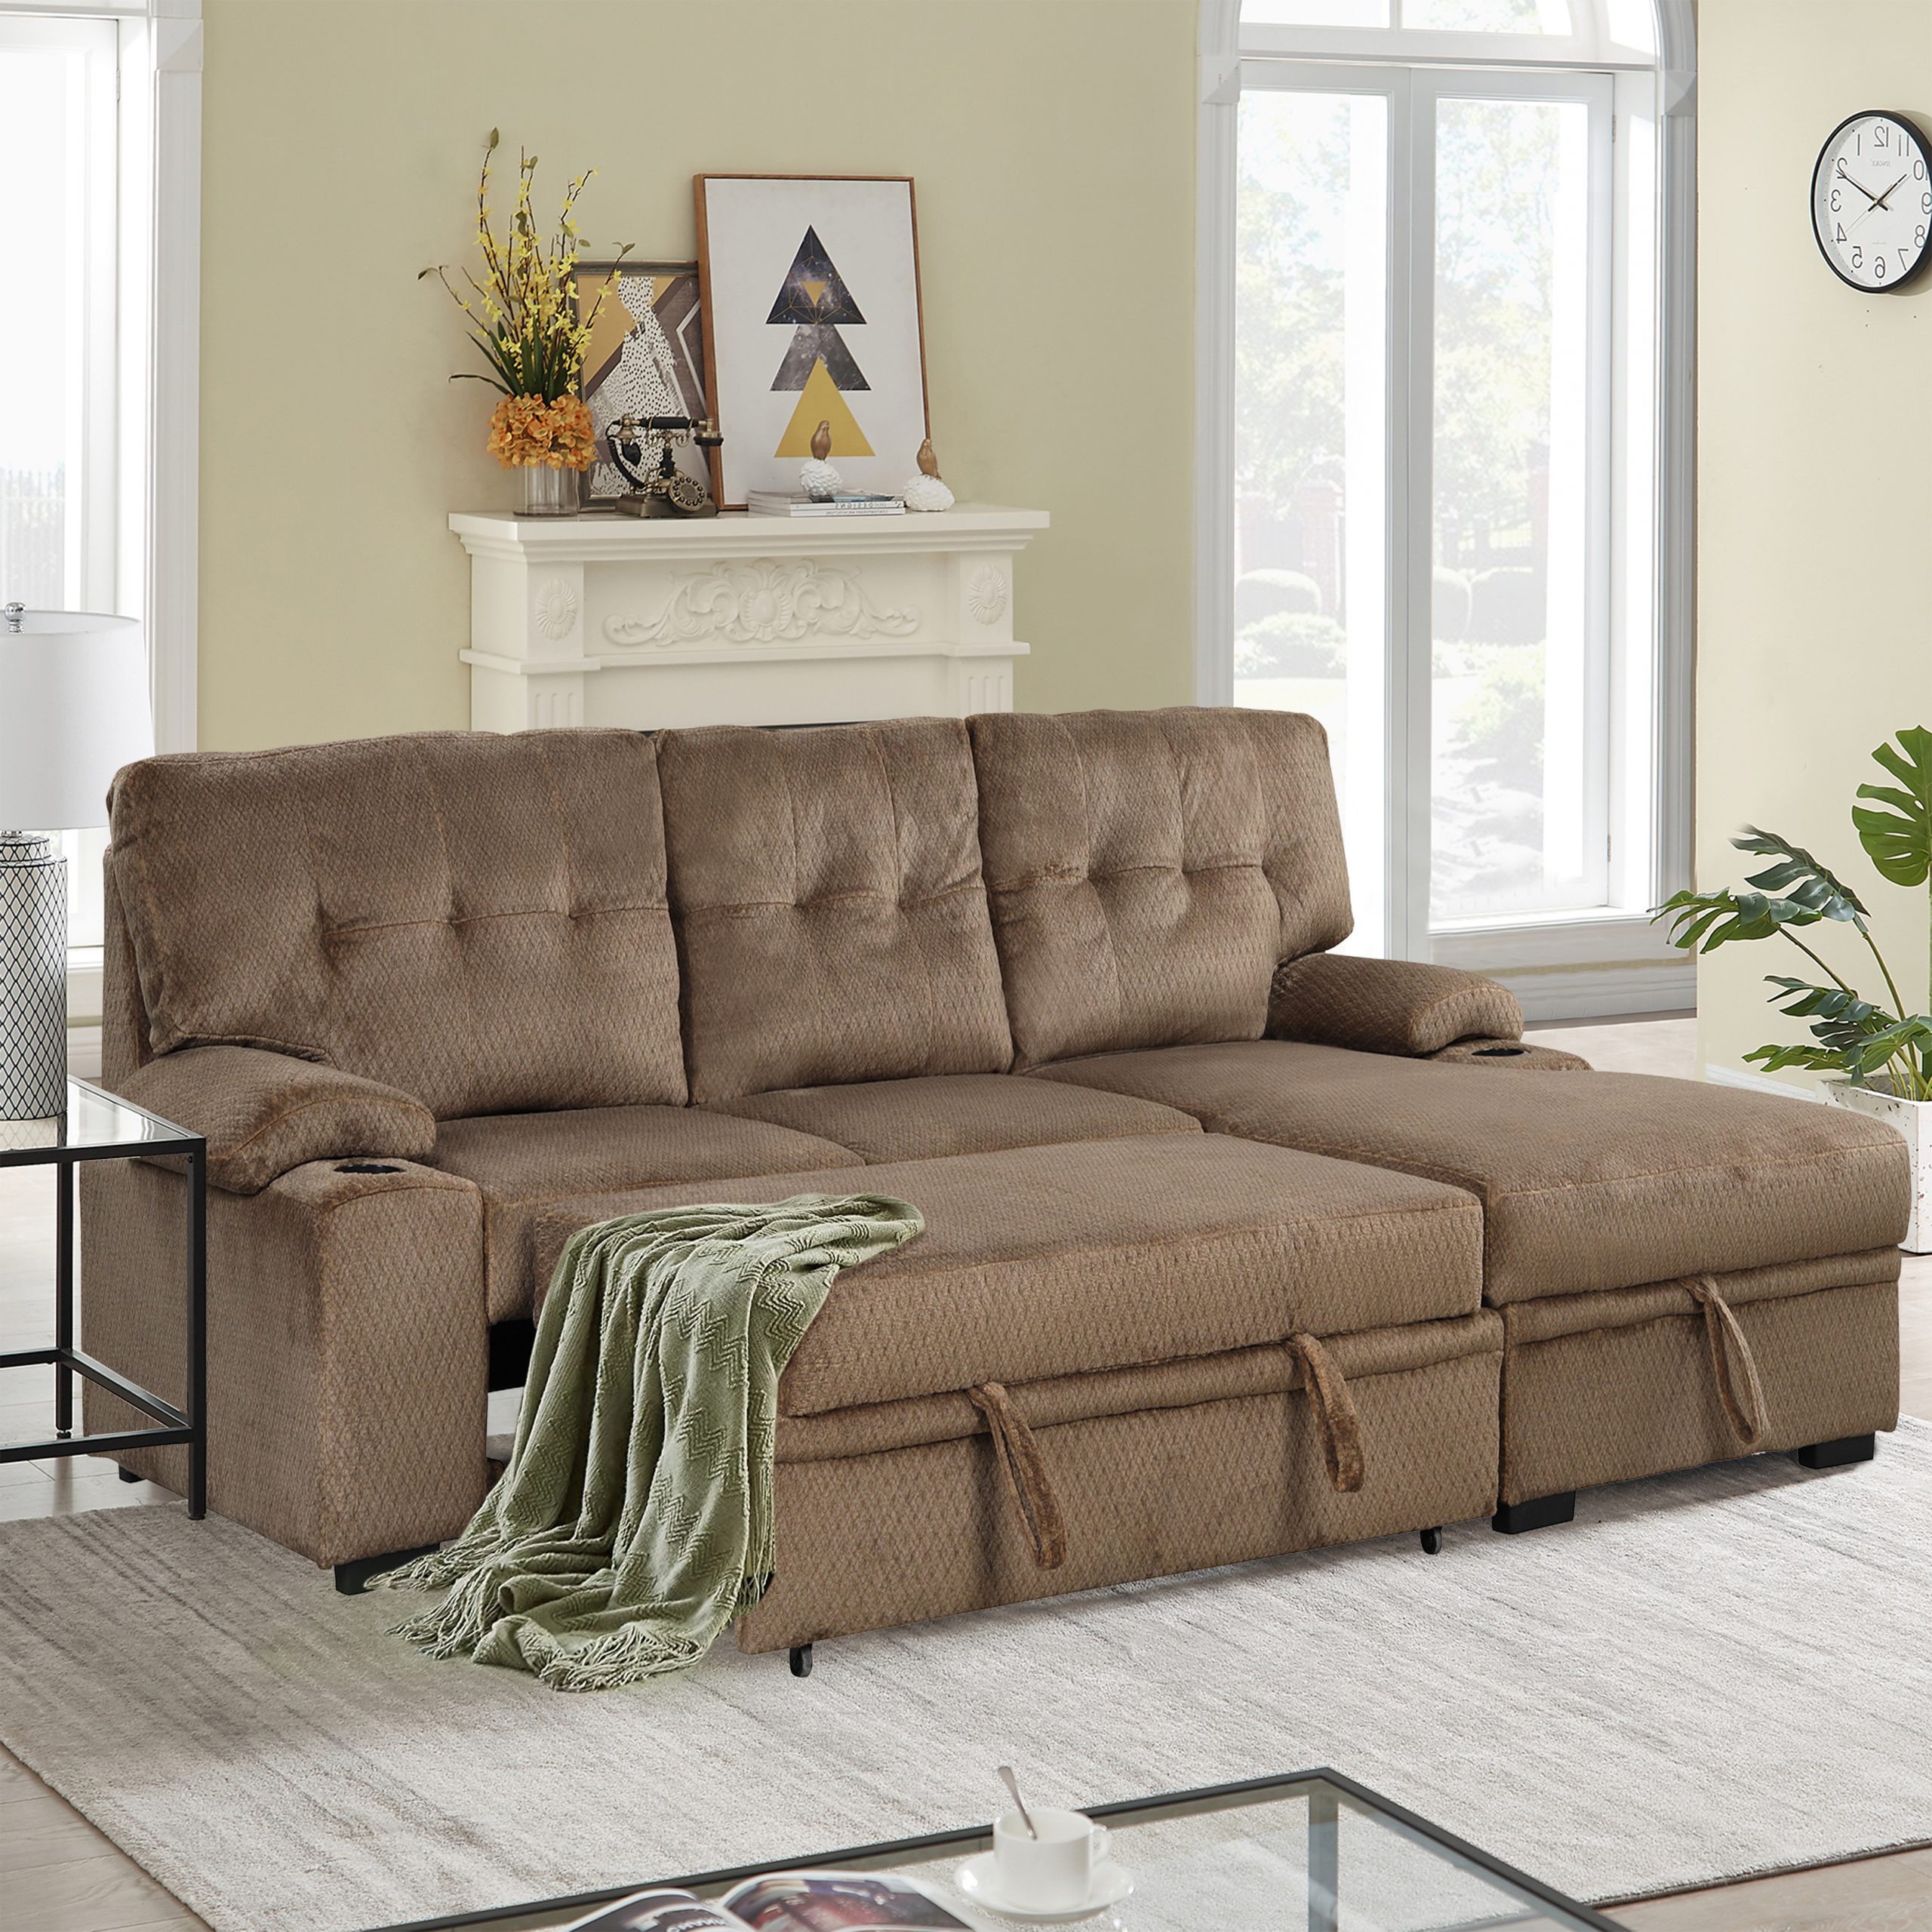 Sleeper Sectional Sofa with Storage Chaise and Cup Holder, Brown - SG000471AAA